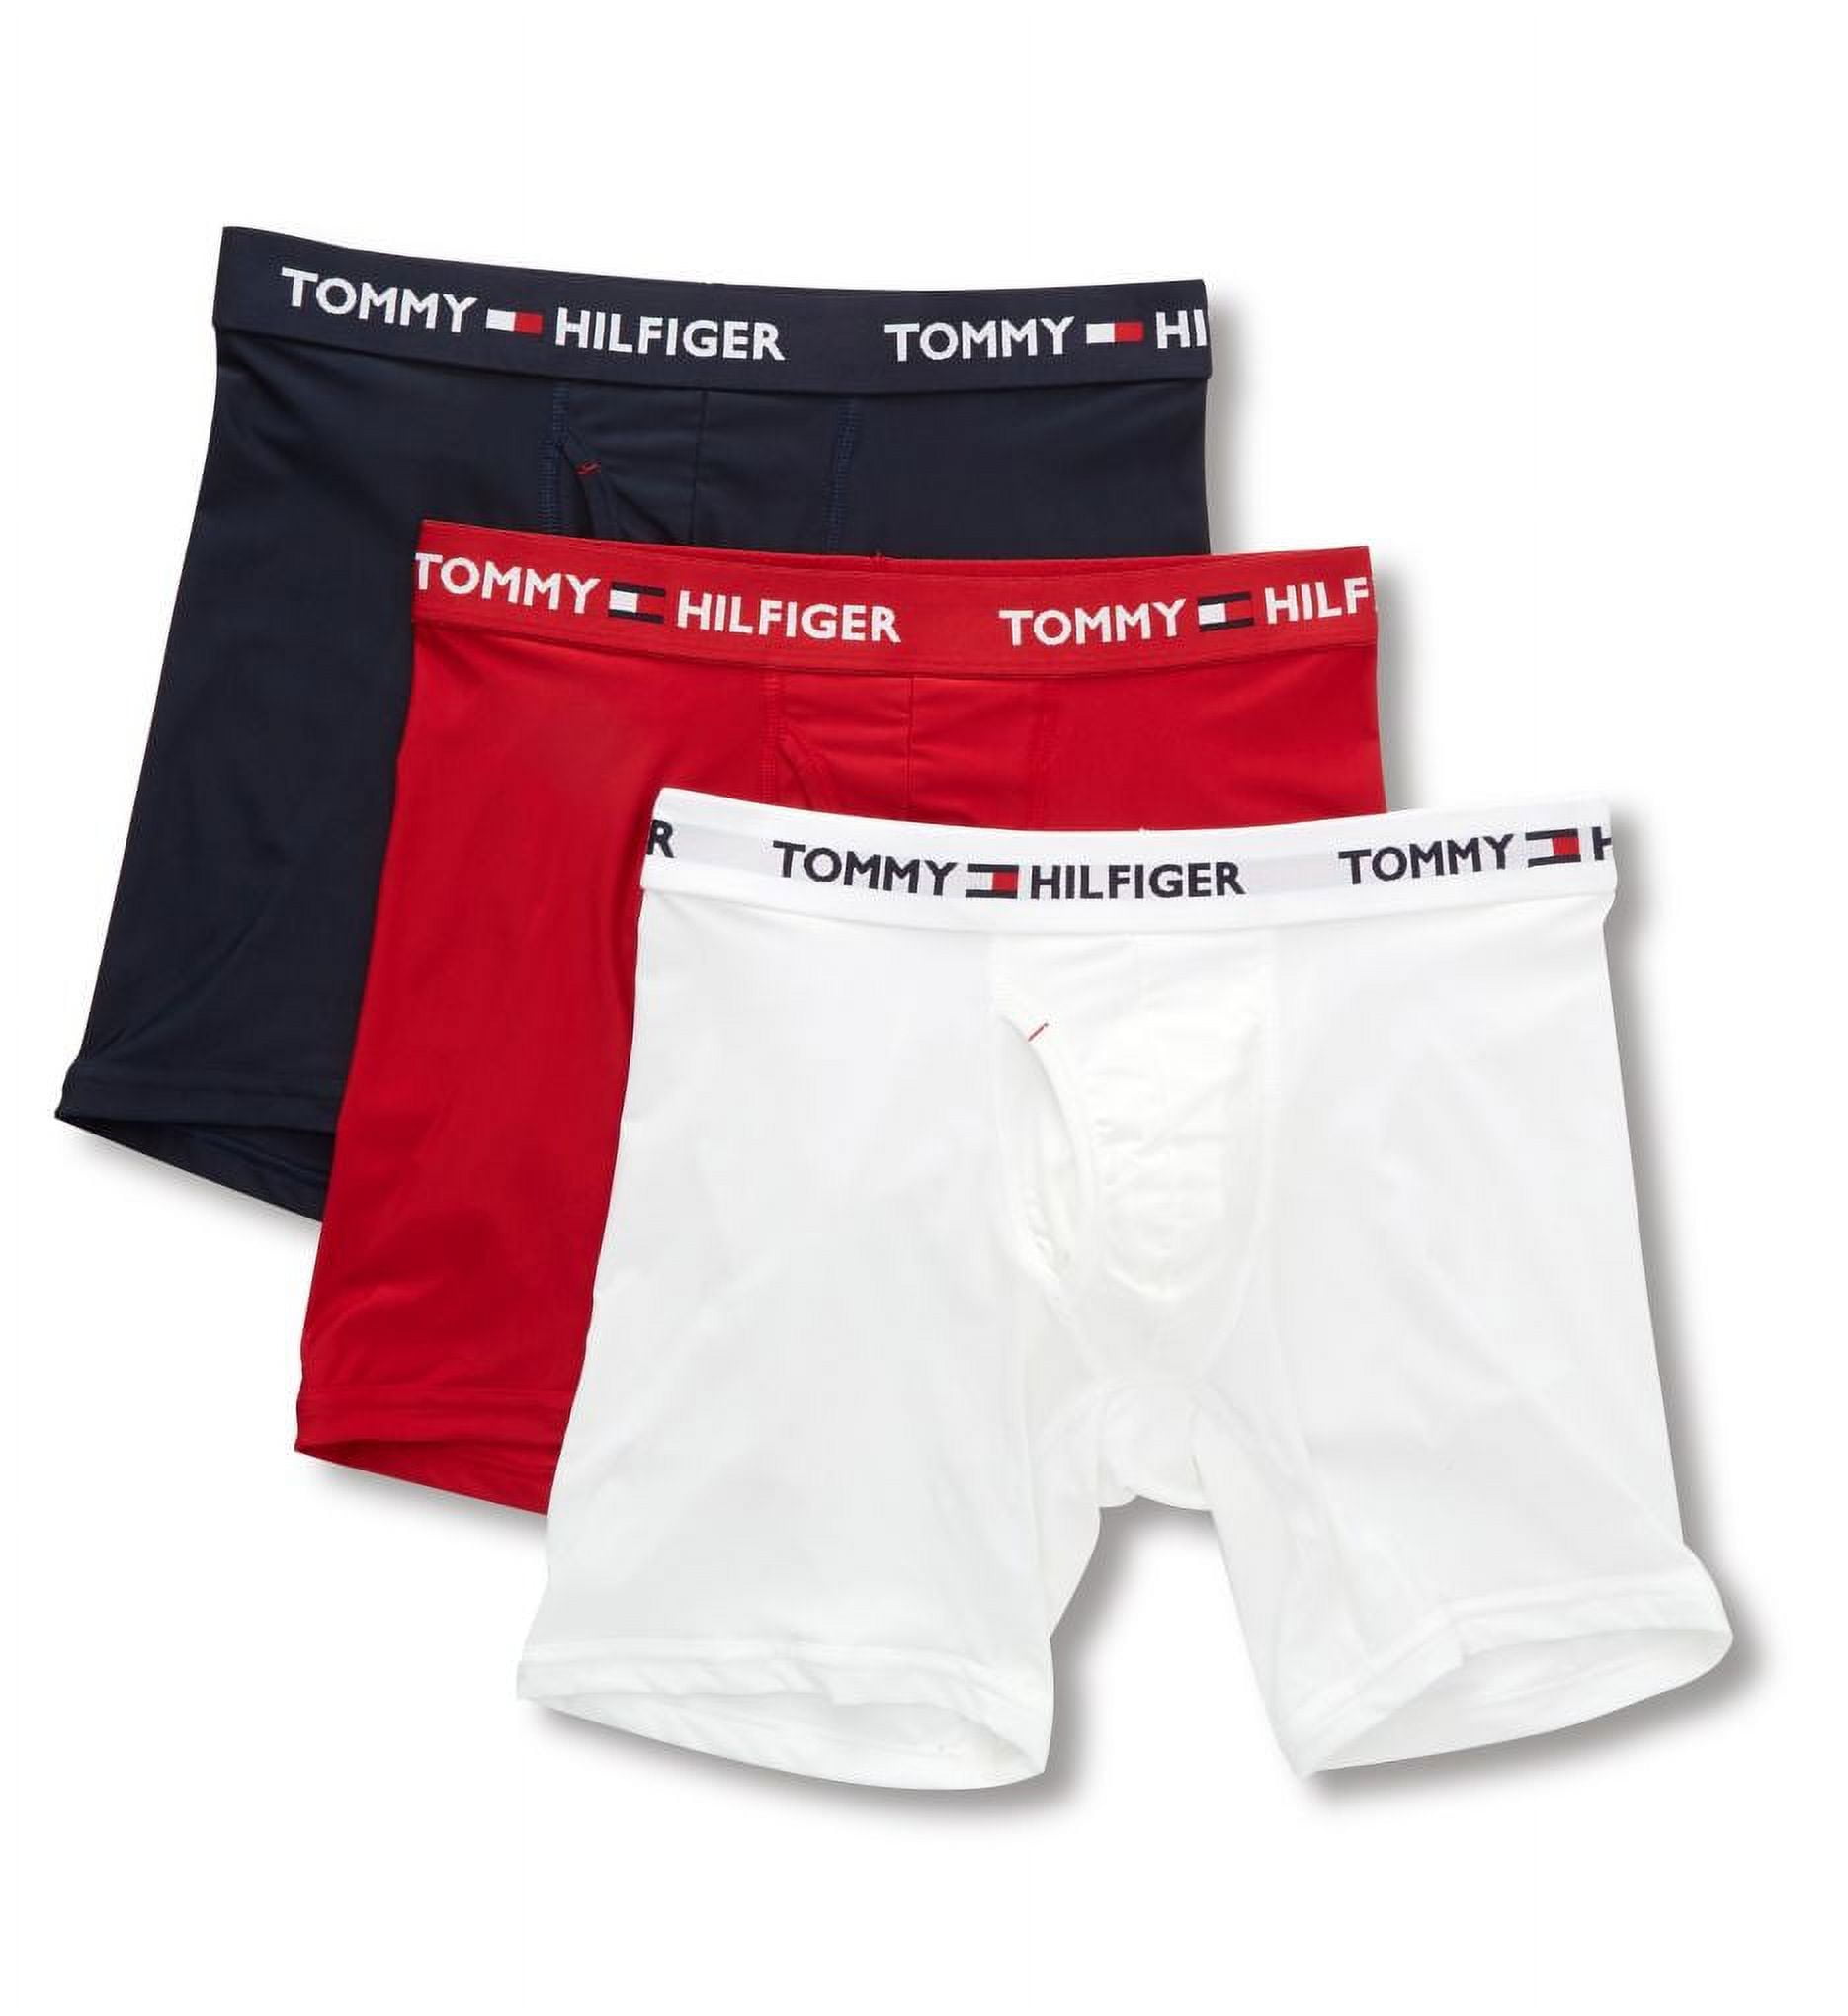 Men's Tommy Hilfiger 09T3490 Everyday Micro Performance Boxer Briefs - 3  Pack (White/Navy/Tango Red M) 